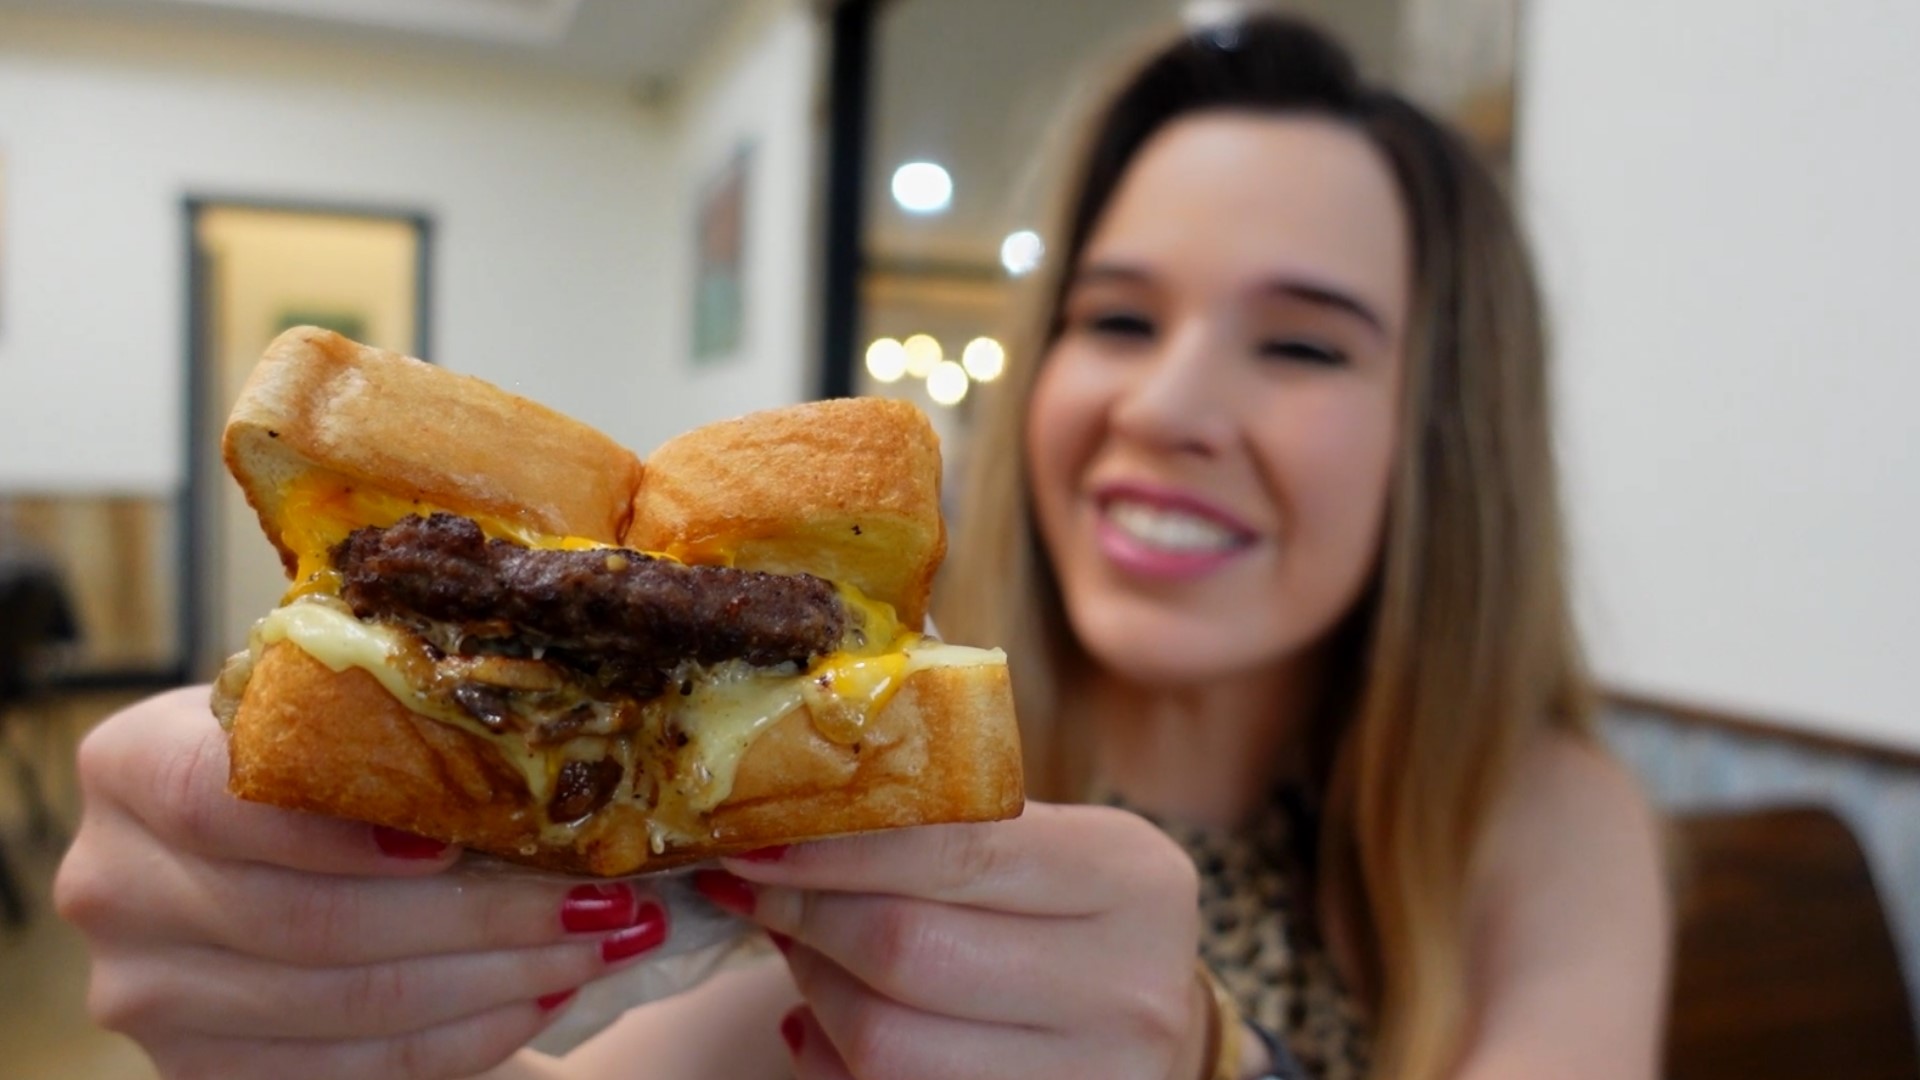 Neighborhood Eats' Lexi Hazlett went to Barbed Wire Burger Co. in La Vernia! She also has a special message for viewers.